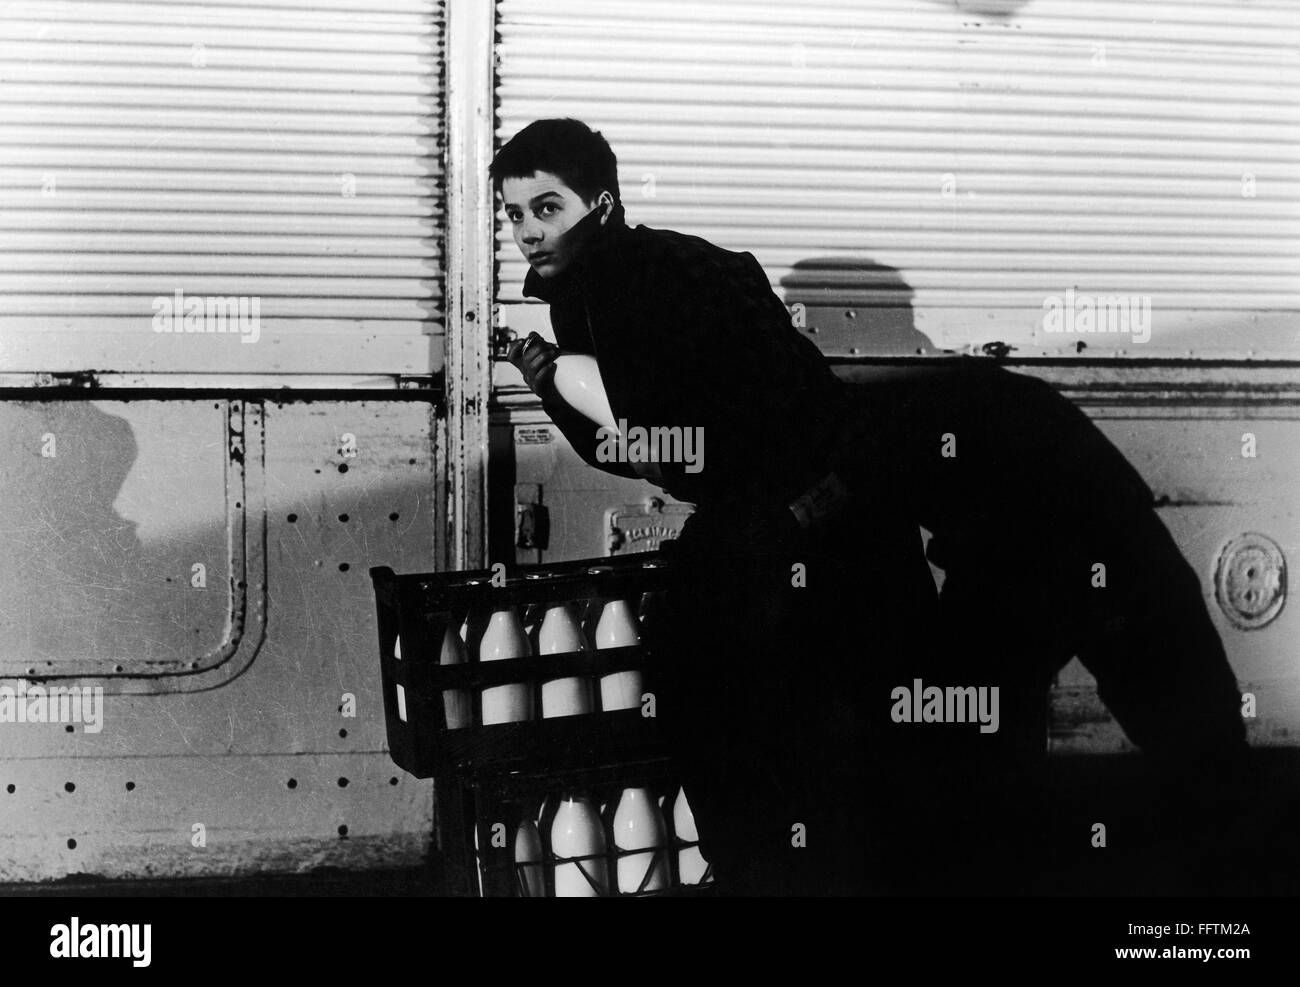 FILM: 400 BLOWS, 1959. /nJean-Pierre Leaud as the young Antoine Doinel stealing a bottle of milk in 'The 400 Blows' directed by Franτois Truffaut, 1959. Stock Photo